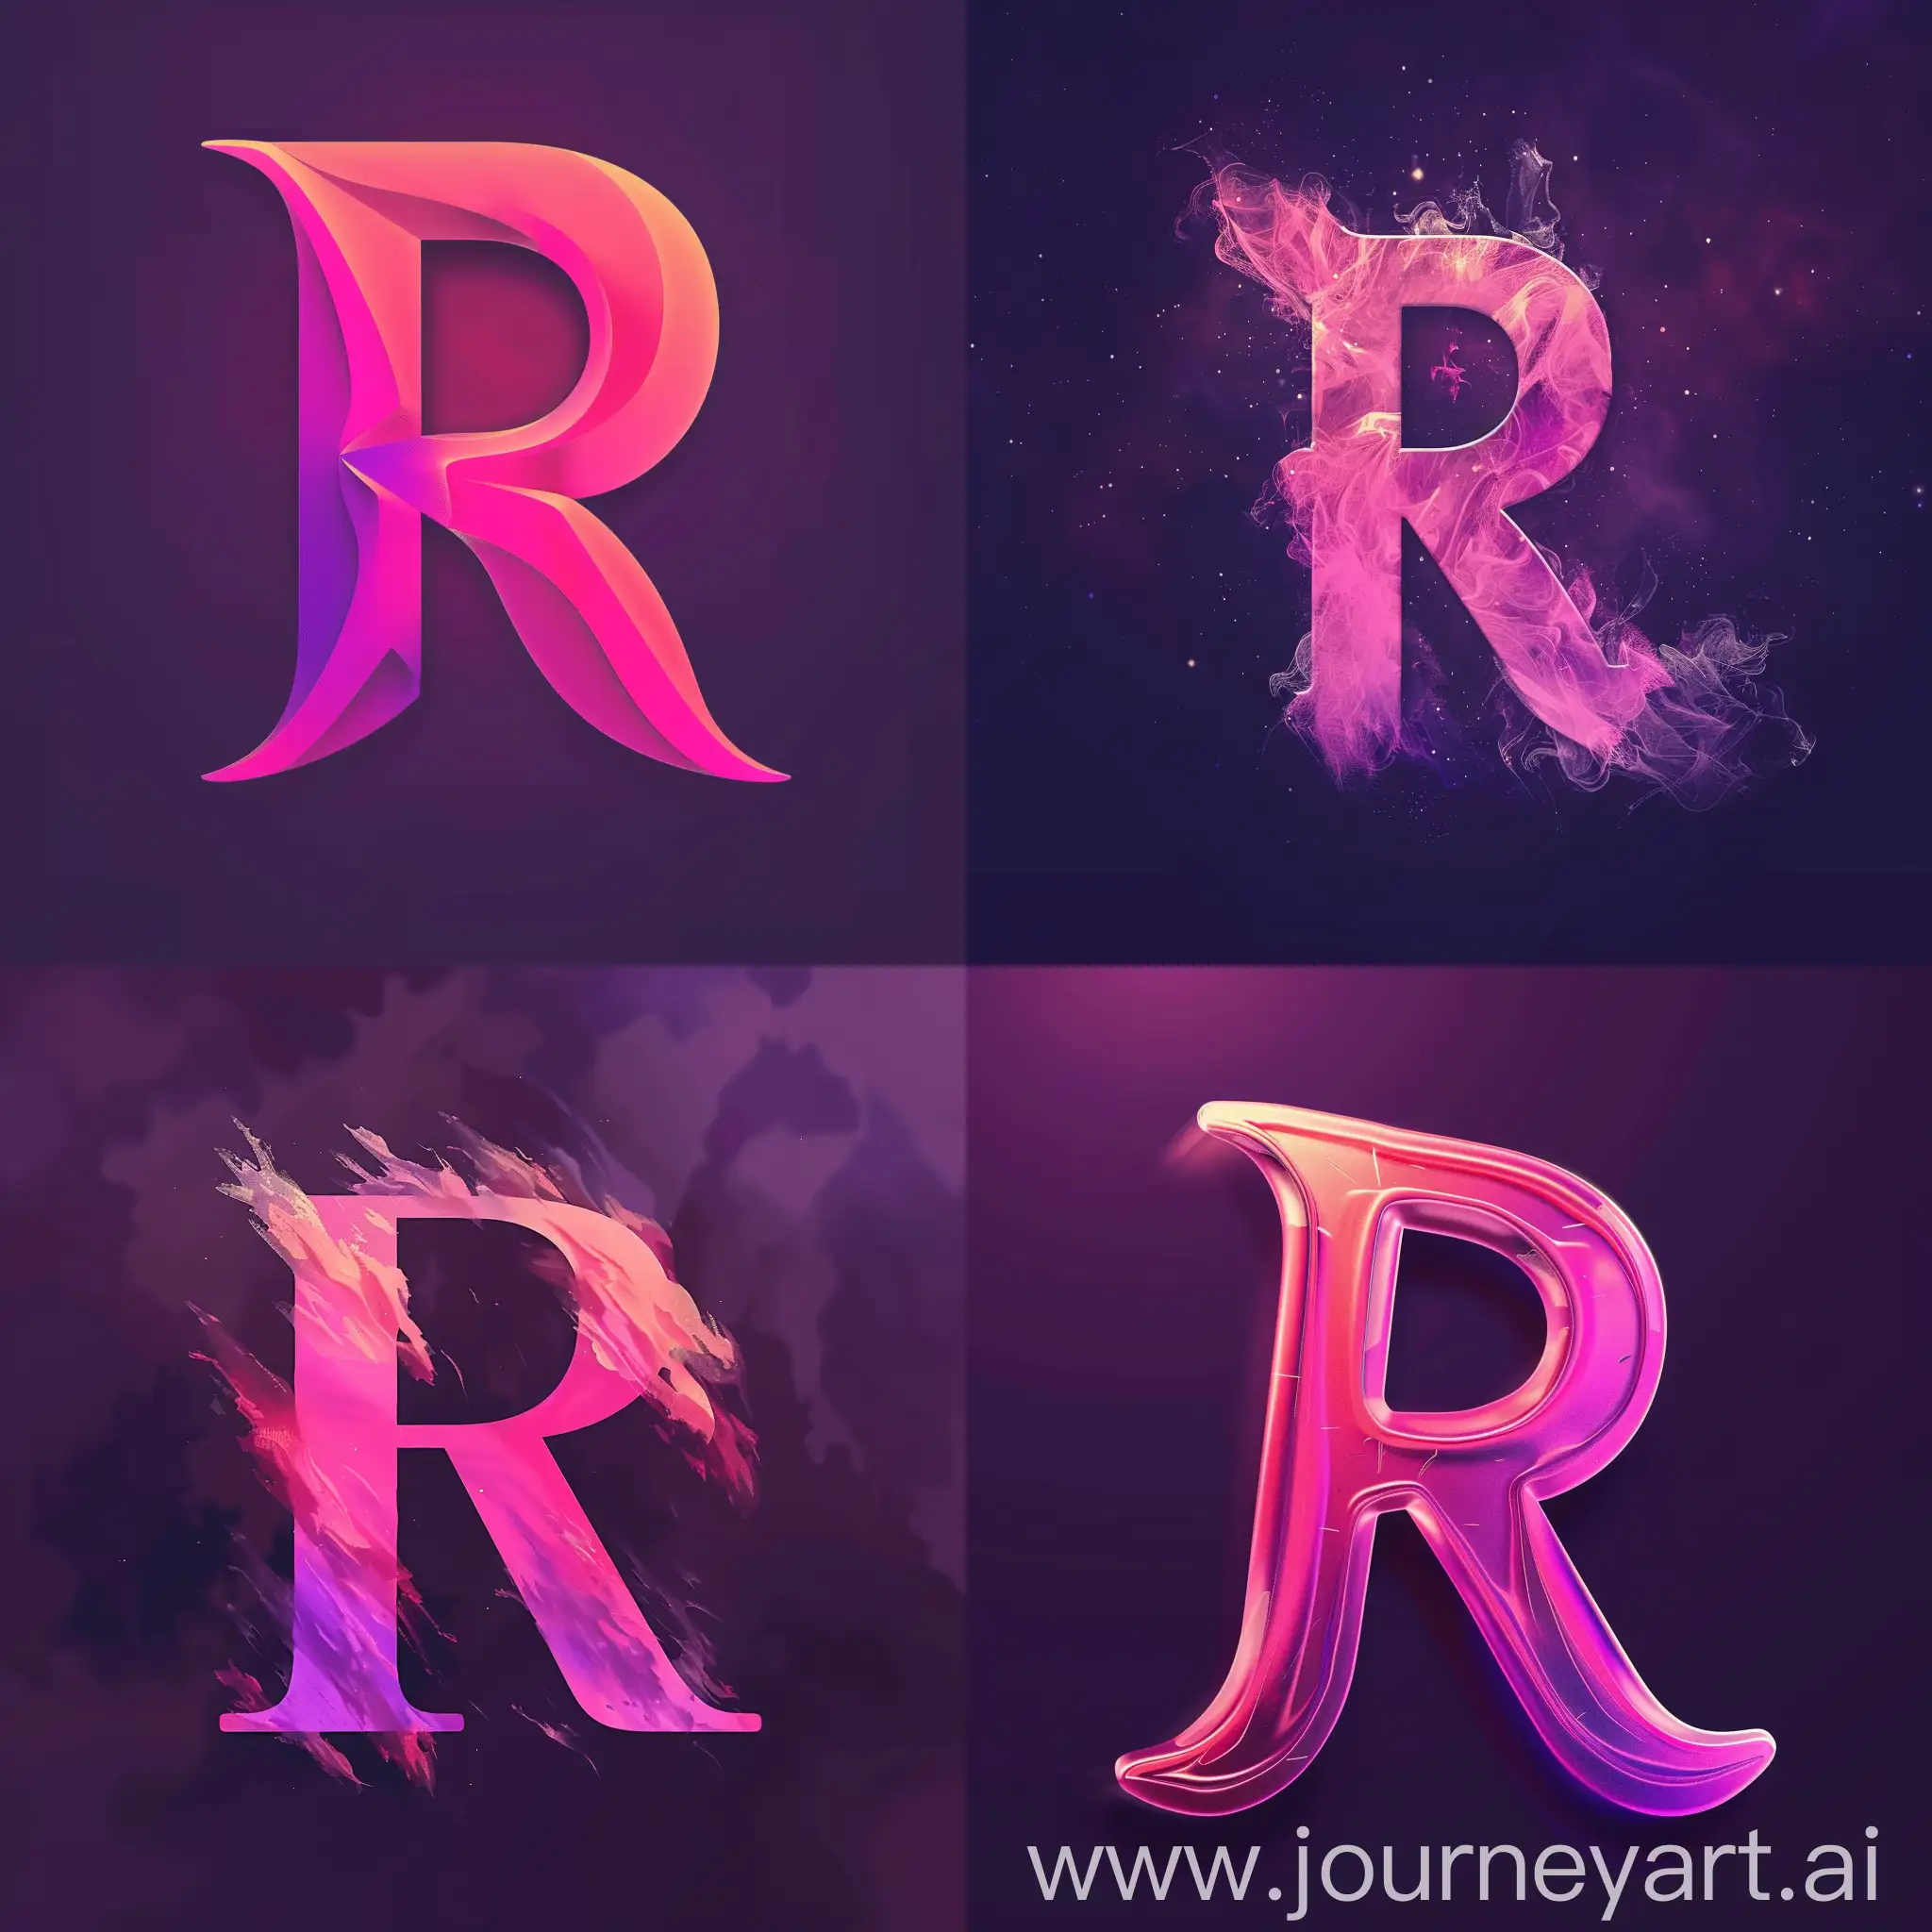 Make an avatar. In the middle, the letter R is made of a pink and purple gradient, and in the background there is a dark purple color